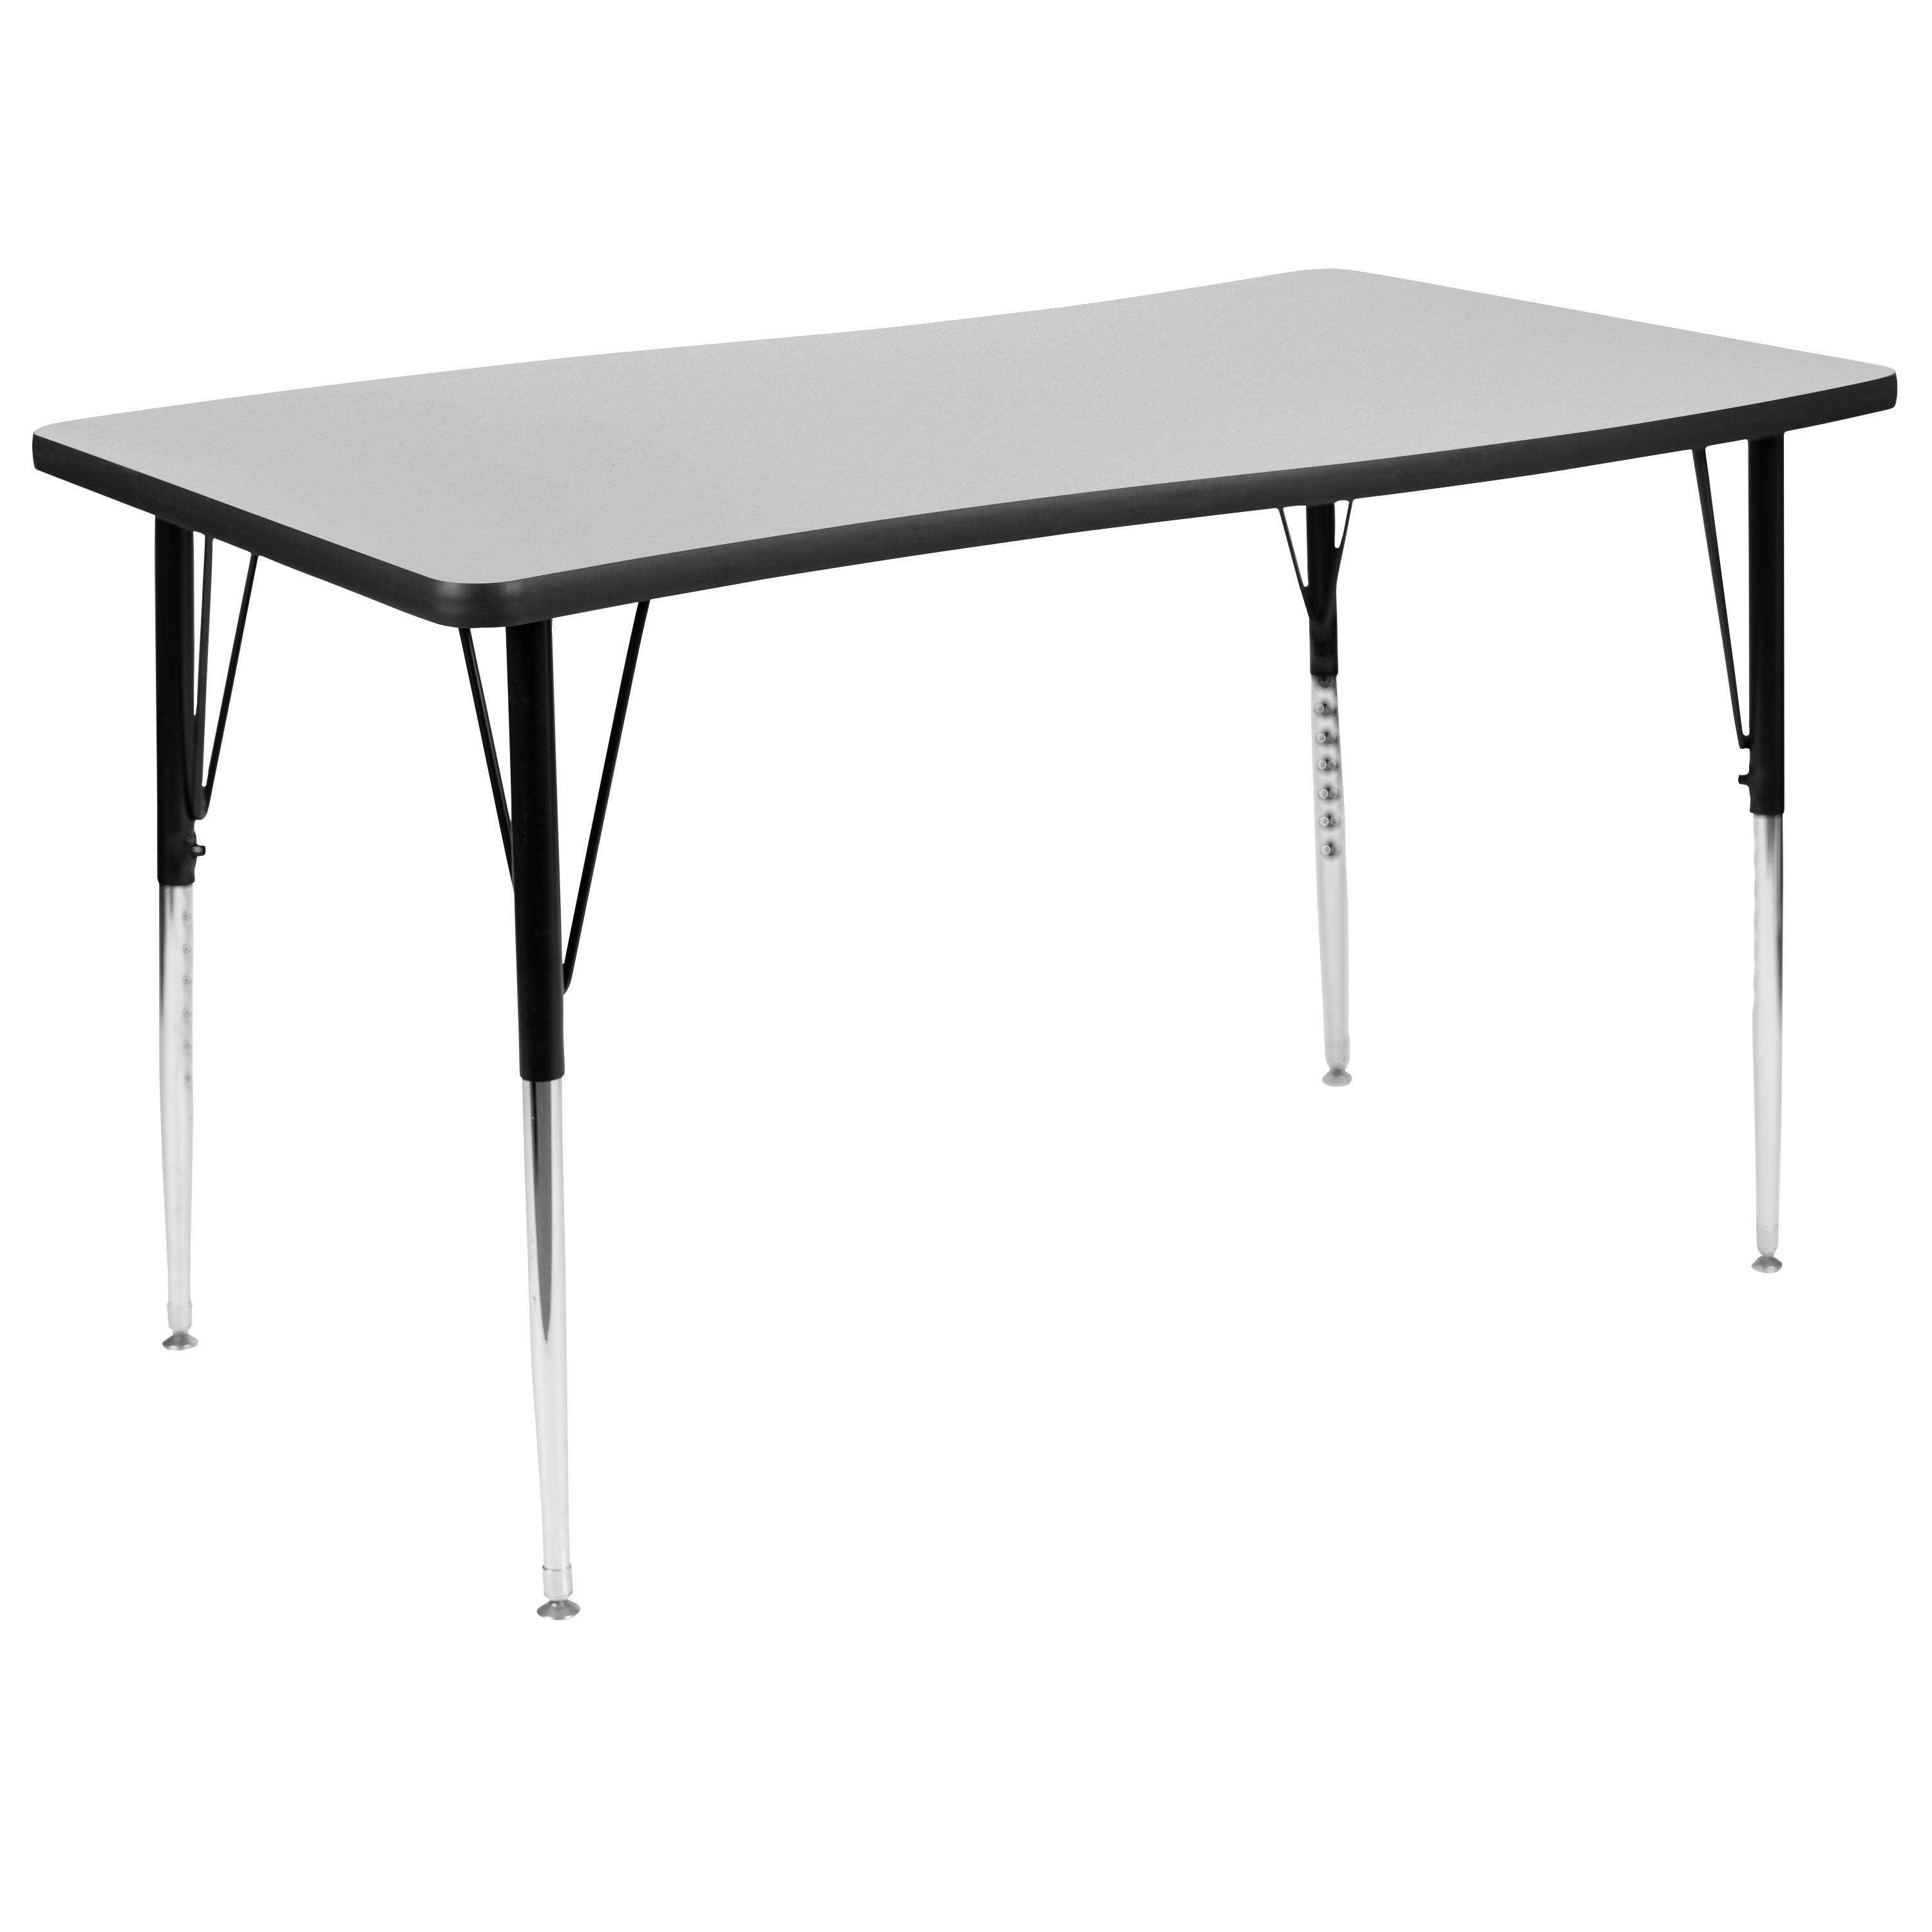 28"W x 47.5"L Rectangle Wave Flexible Collaborative Thermal Laminate Activity Table - Standard Height Adjustable Legs-Collaborative Rectangular Activity Table-Flash Furniture-Wall2Wall Furnishings